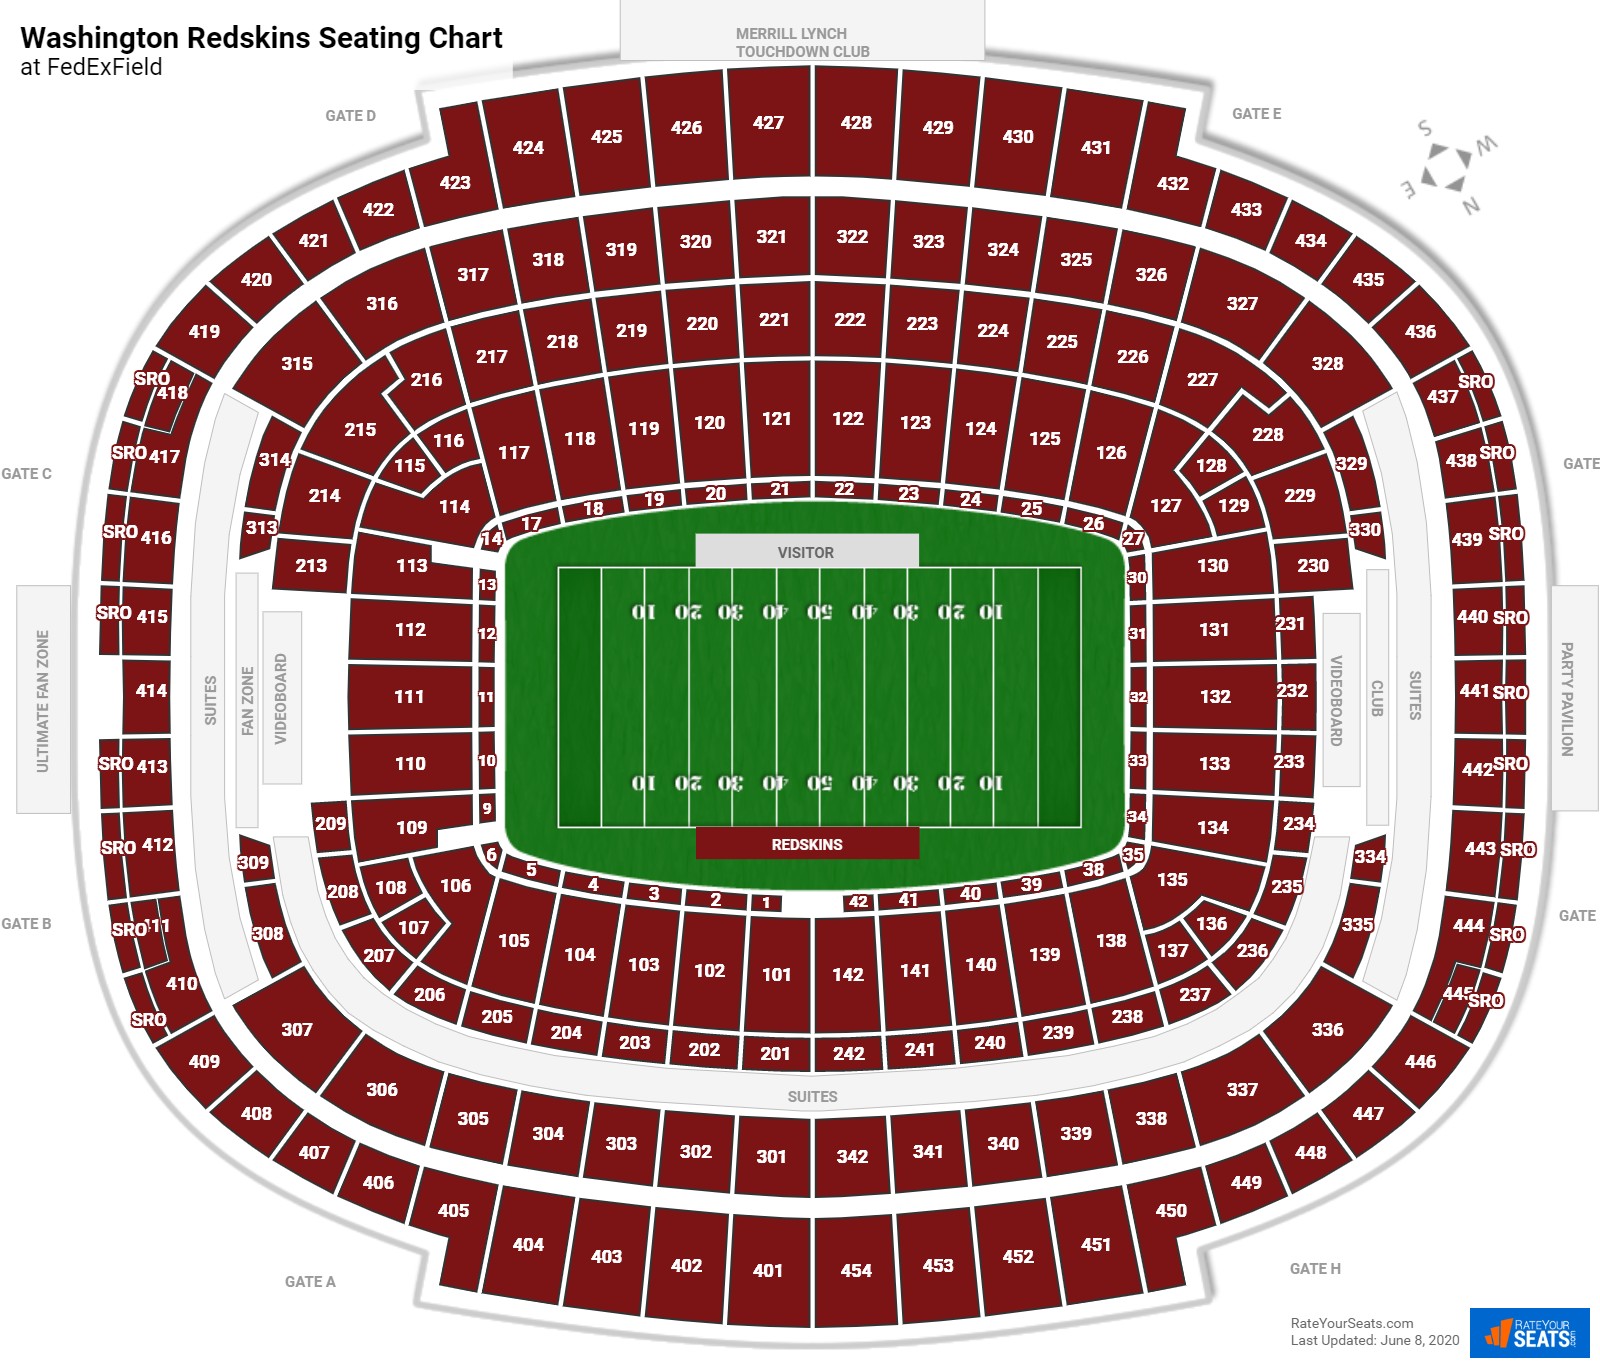 Fedex Field Seating Chart With Seat Numbers Elcho Table